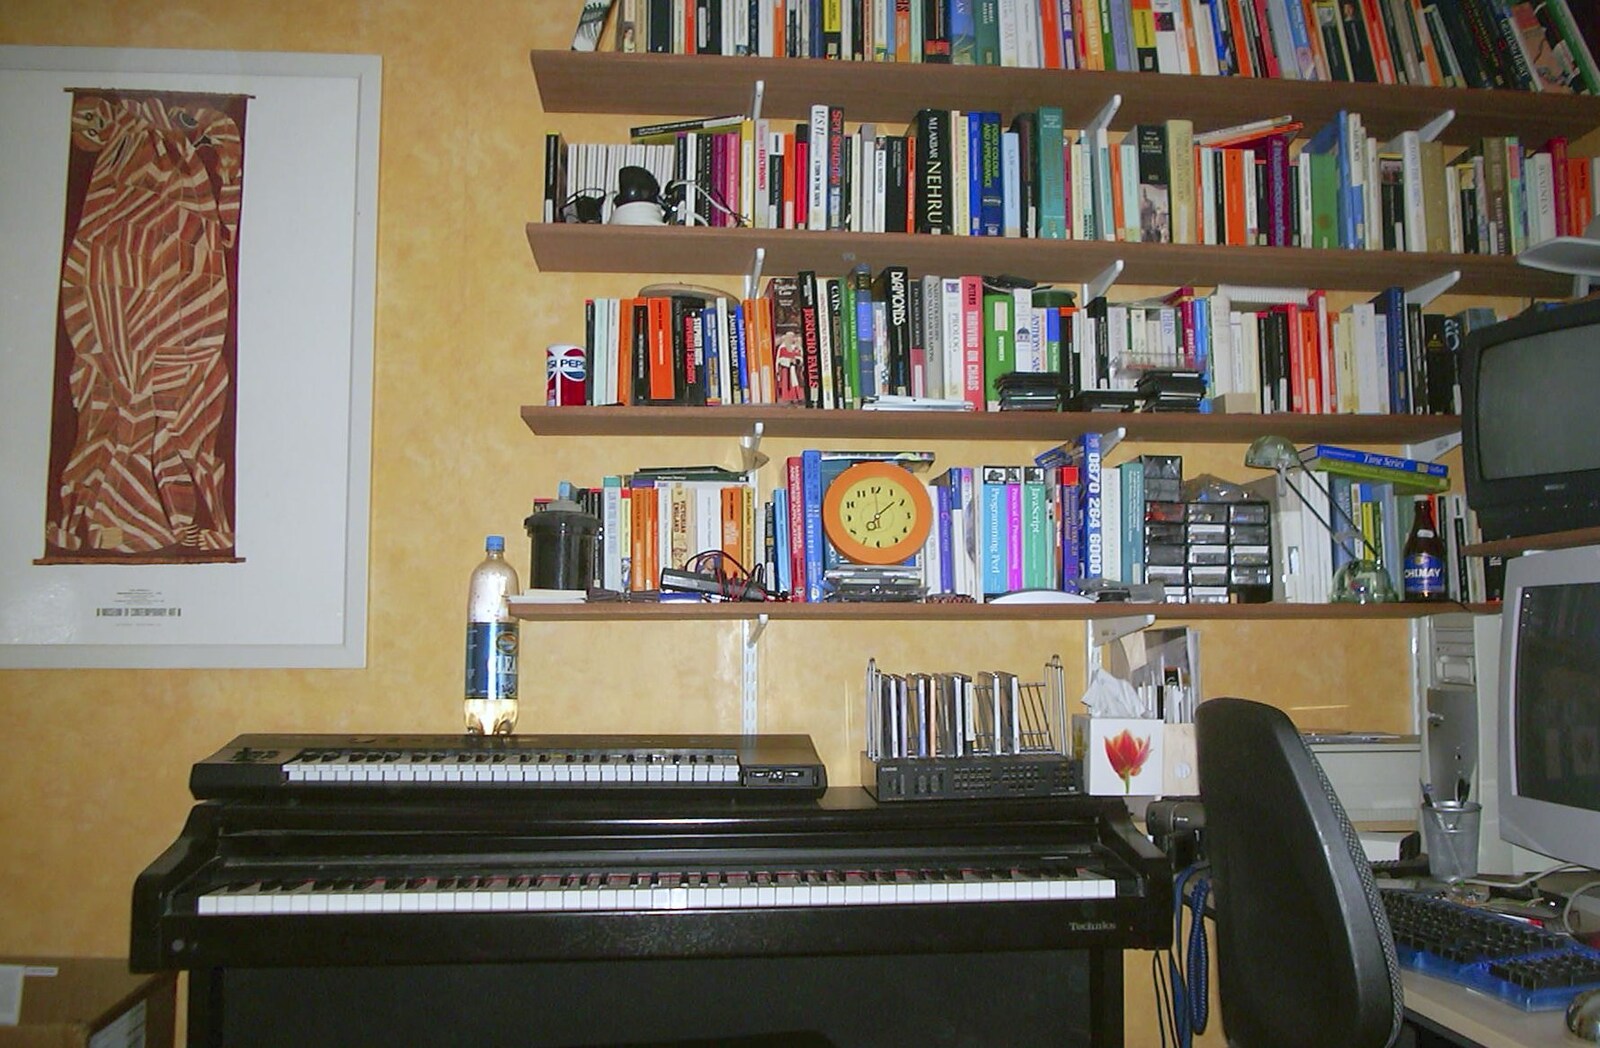 Piano, keyboard and bookshelves from June Randomness, Brome, Suffolk - 15th June 2001